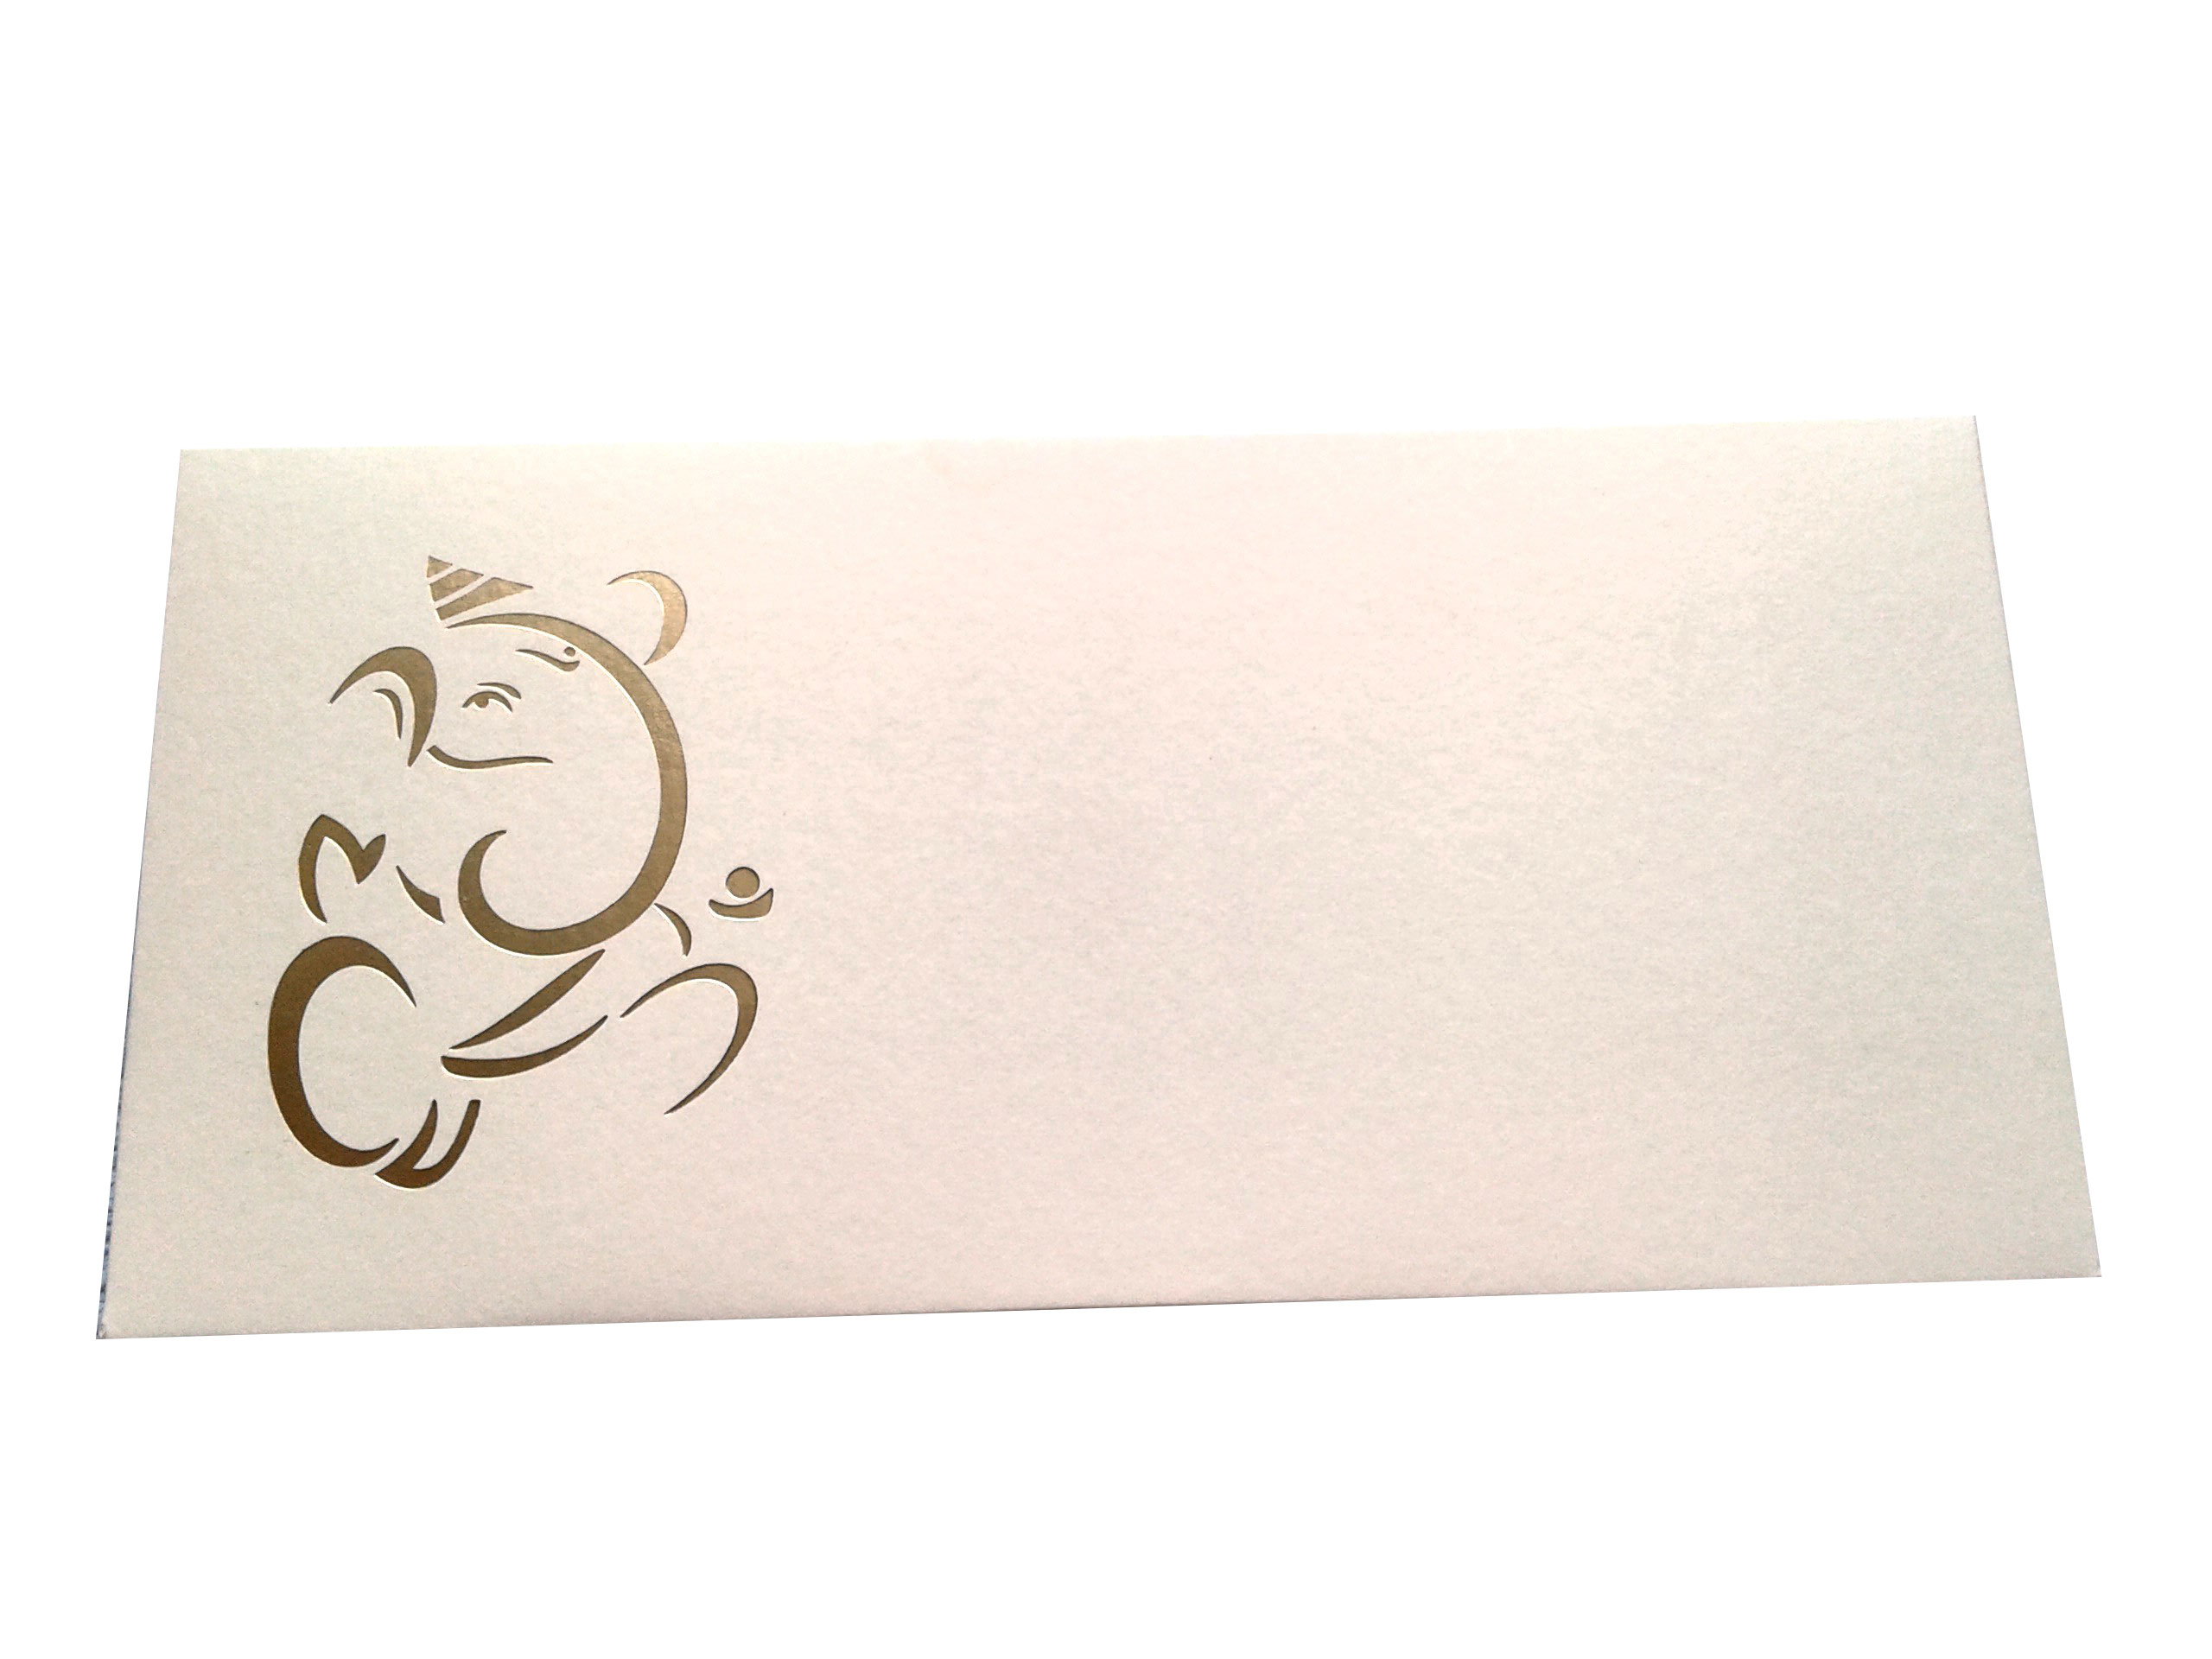 Signature Money Envelope with Hot Foil Stamped Ganesh